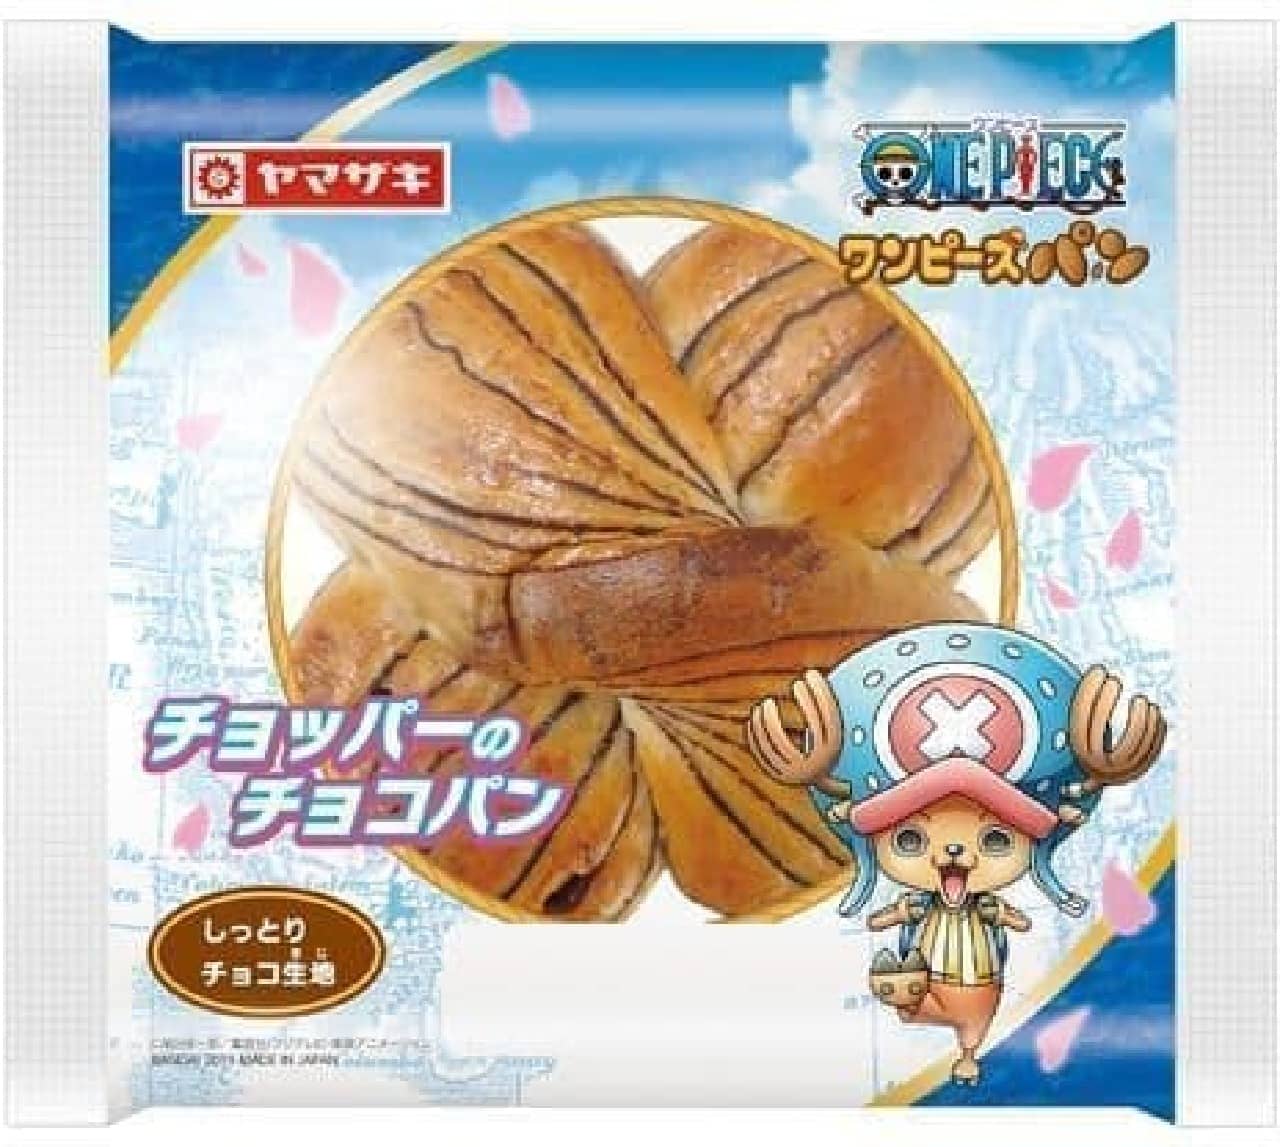 Yamazaki, sweet bread in collaboration with "ONE PIECE"